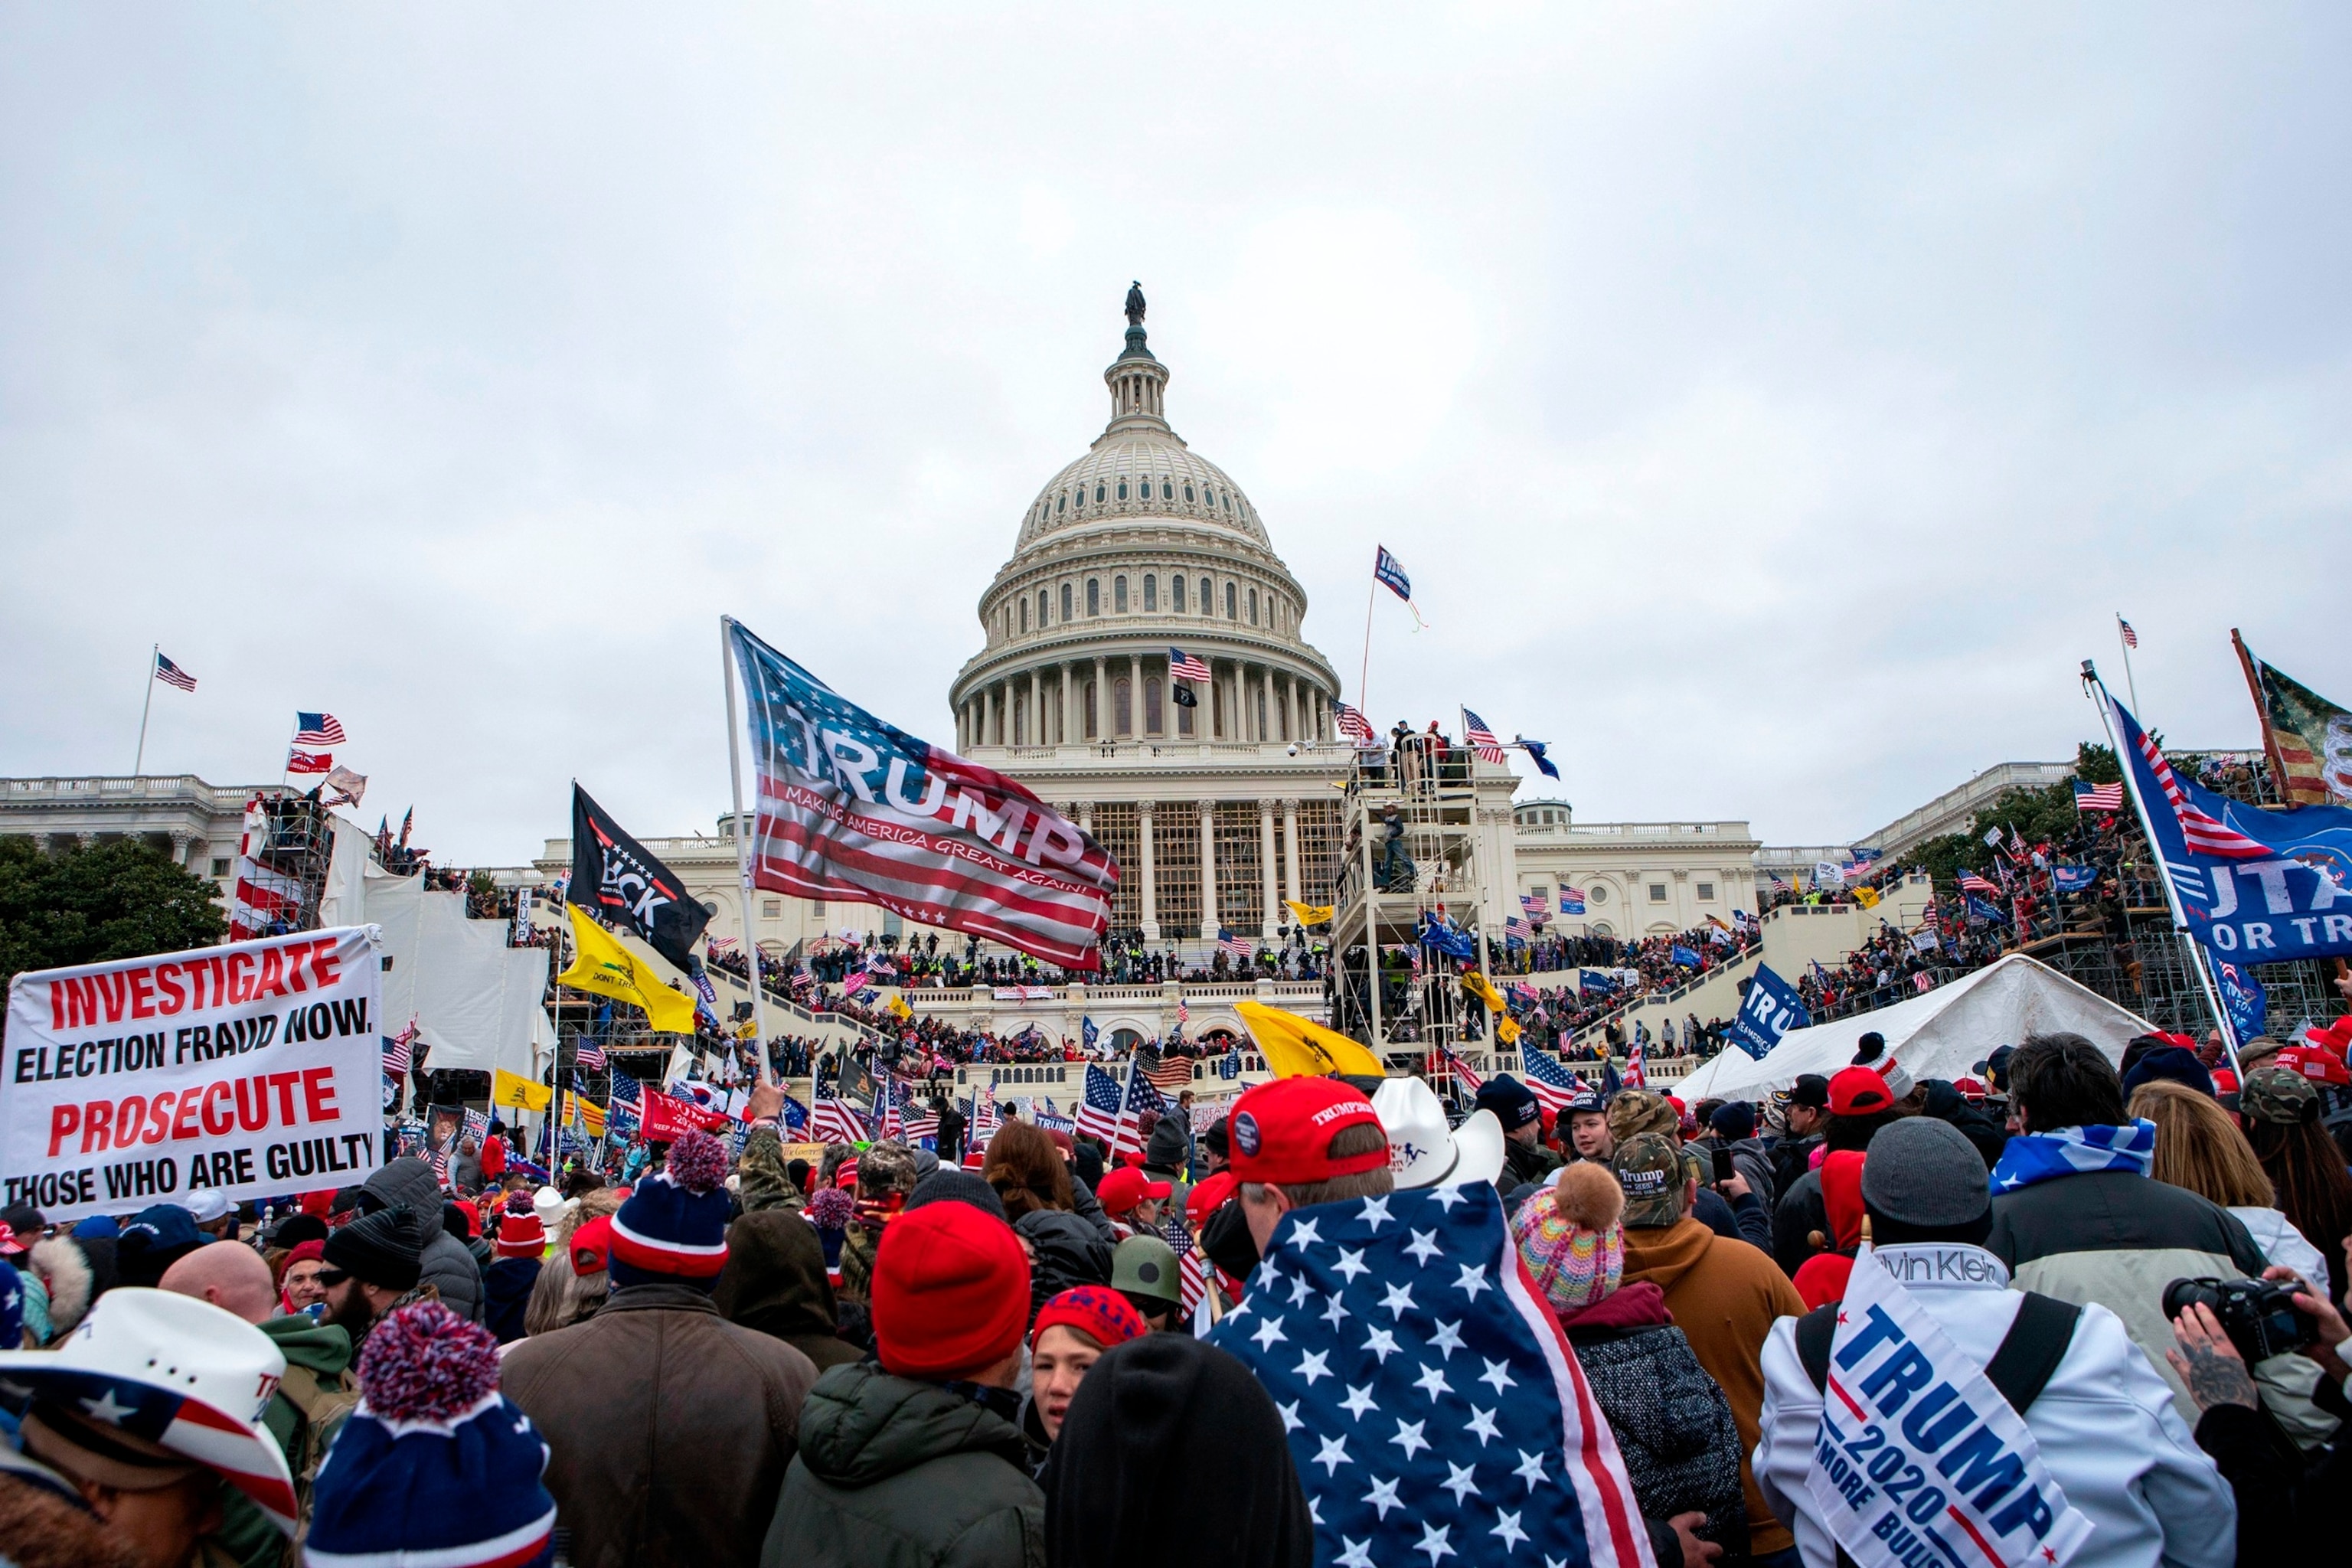 PHOTO: In this Jan. 6, 2021, file photo, people loyal to President Donald Trump rally at the U.S. Capitol in Washington, D.C.